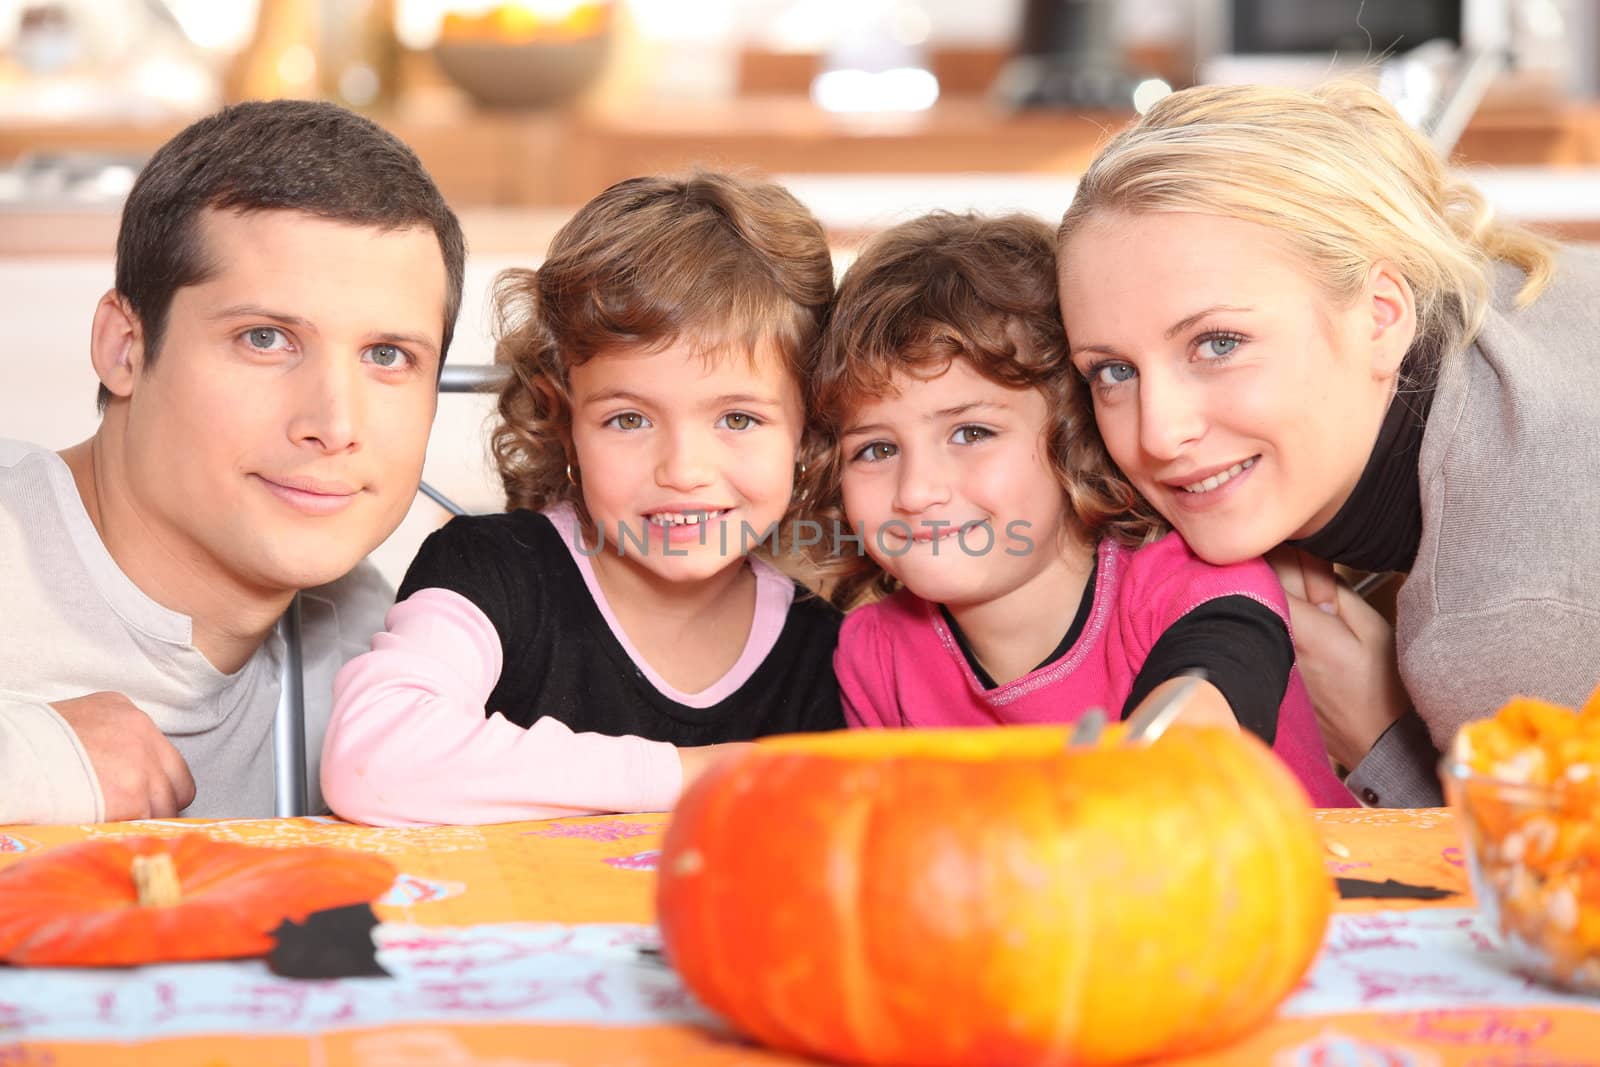 Family carving pumpkins by phovoir